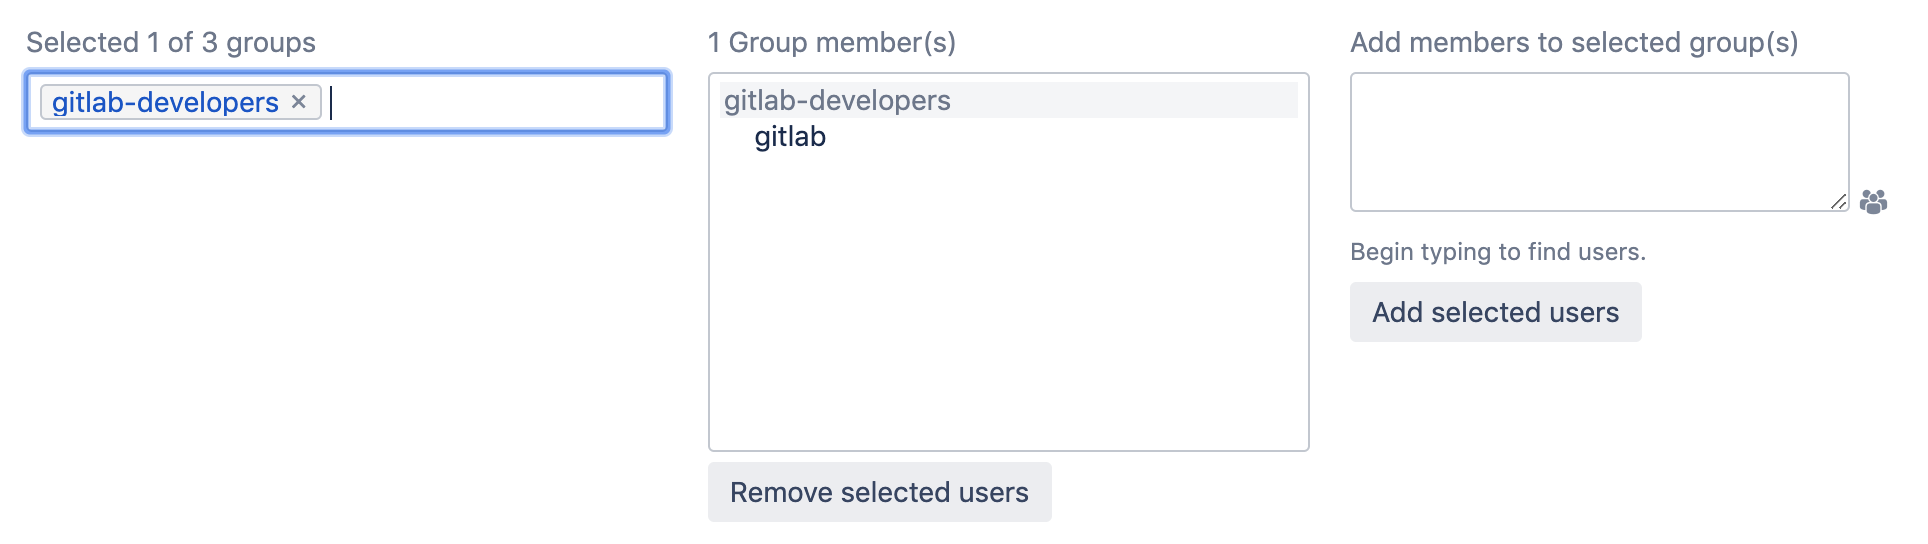 doc/user/project/integrations/img/jira_added_user_to_group.png